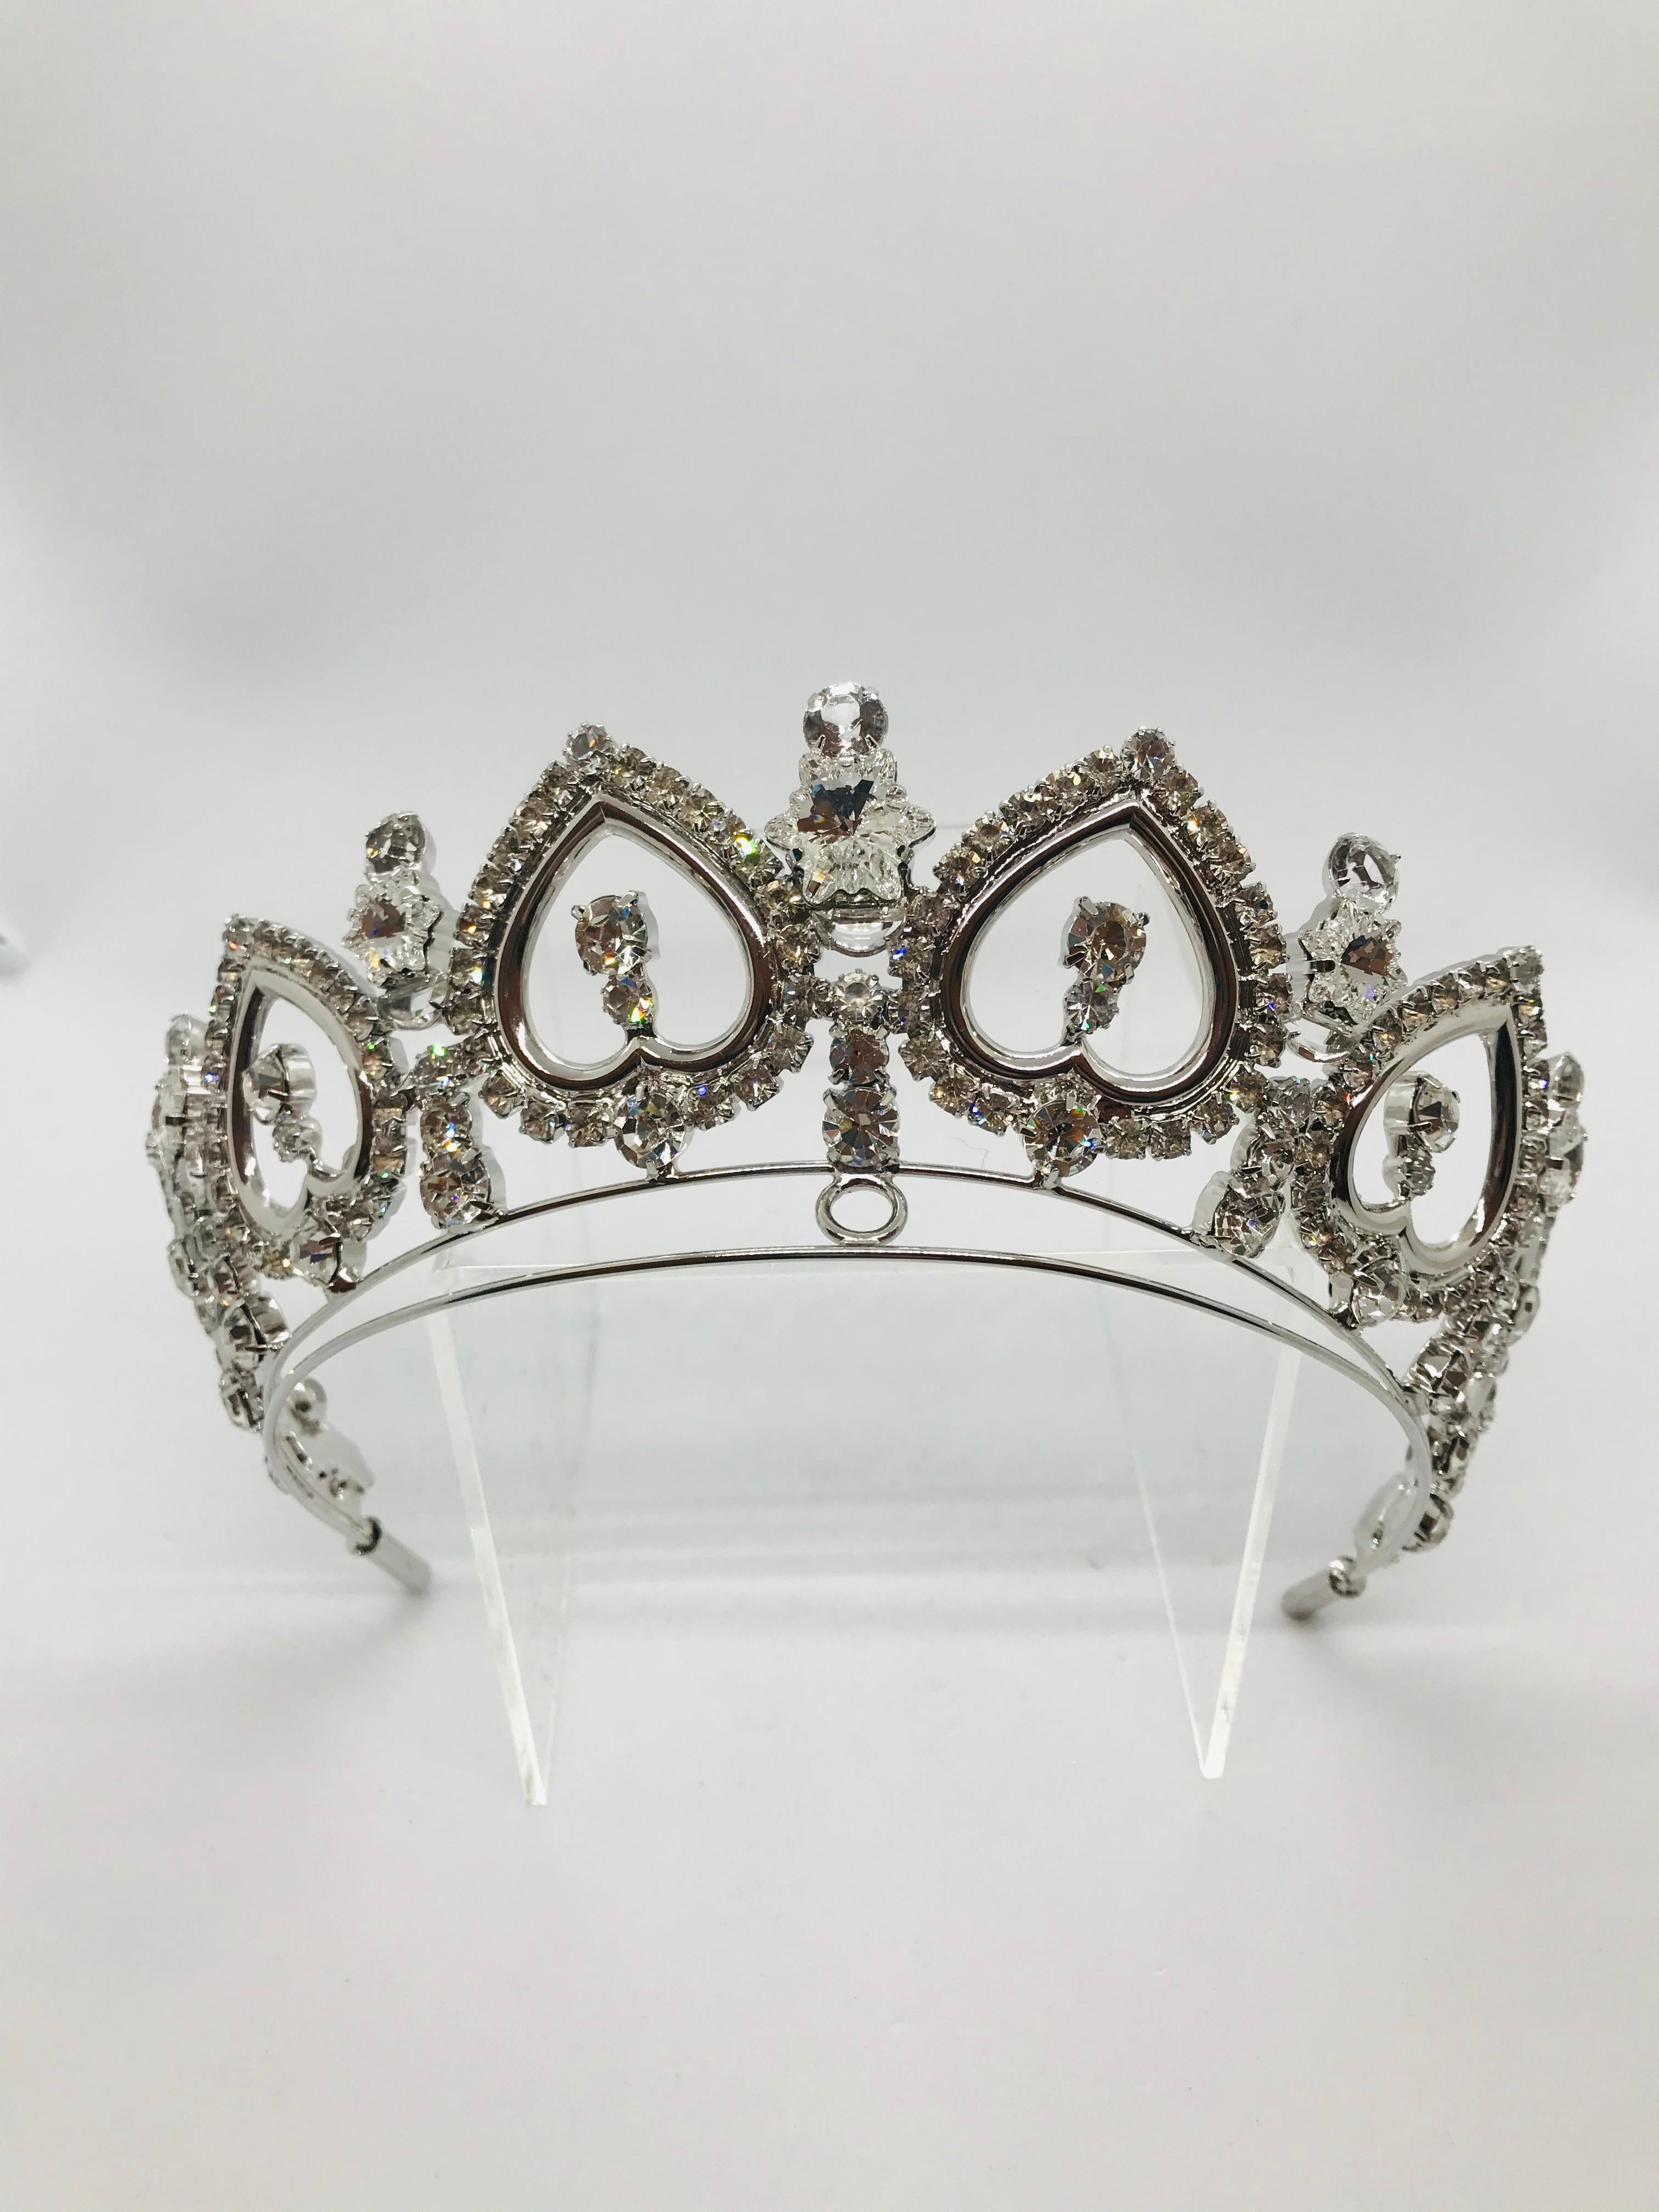 A tiara fit for a queen, this clear Austrian crystal 